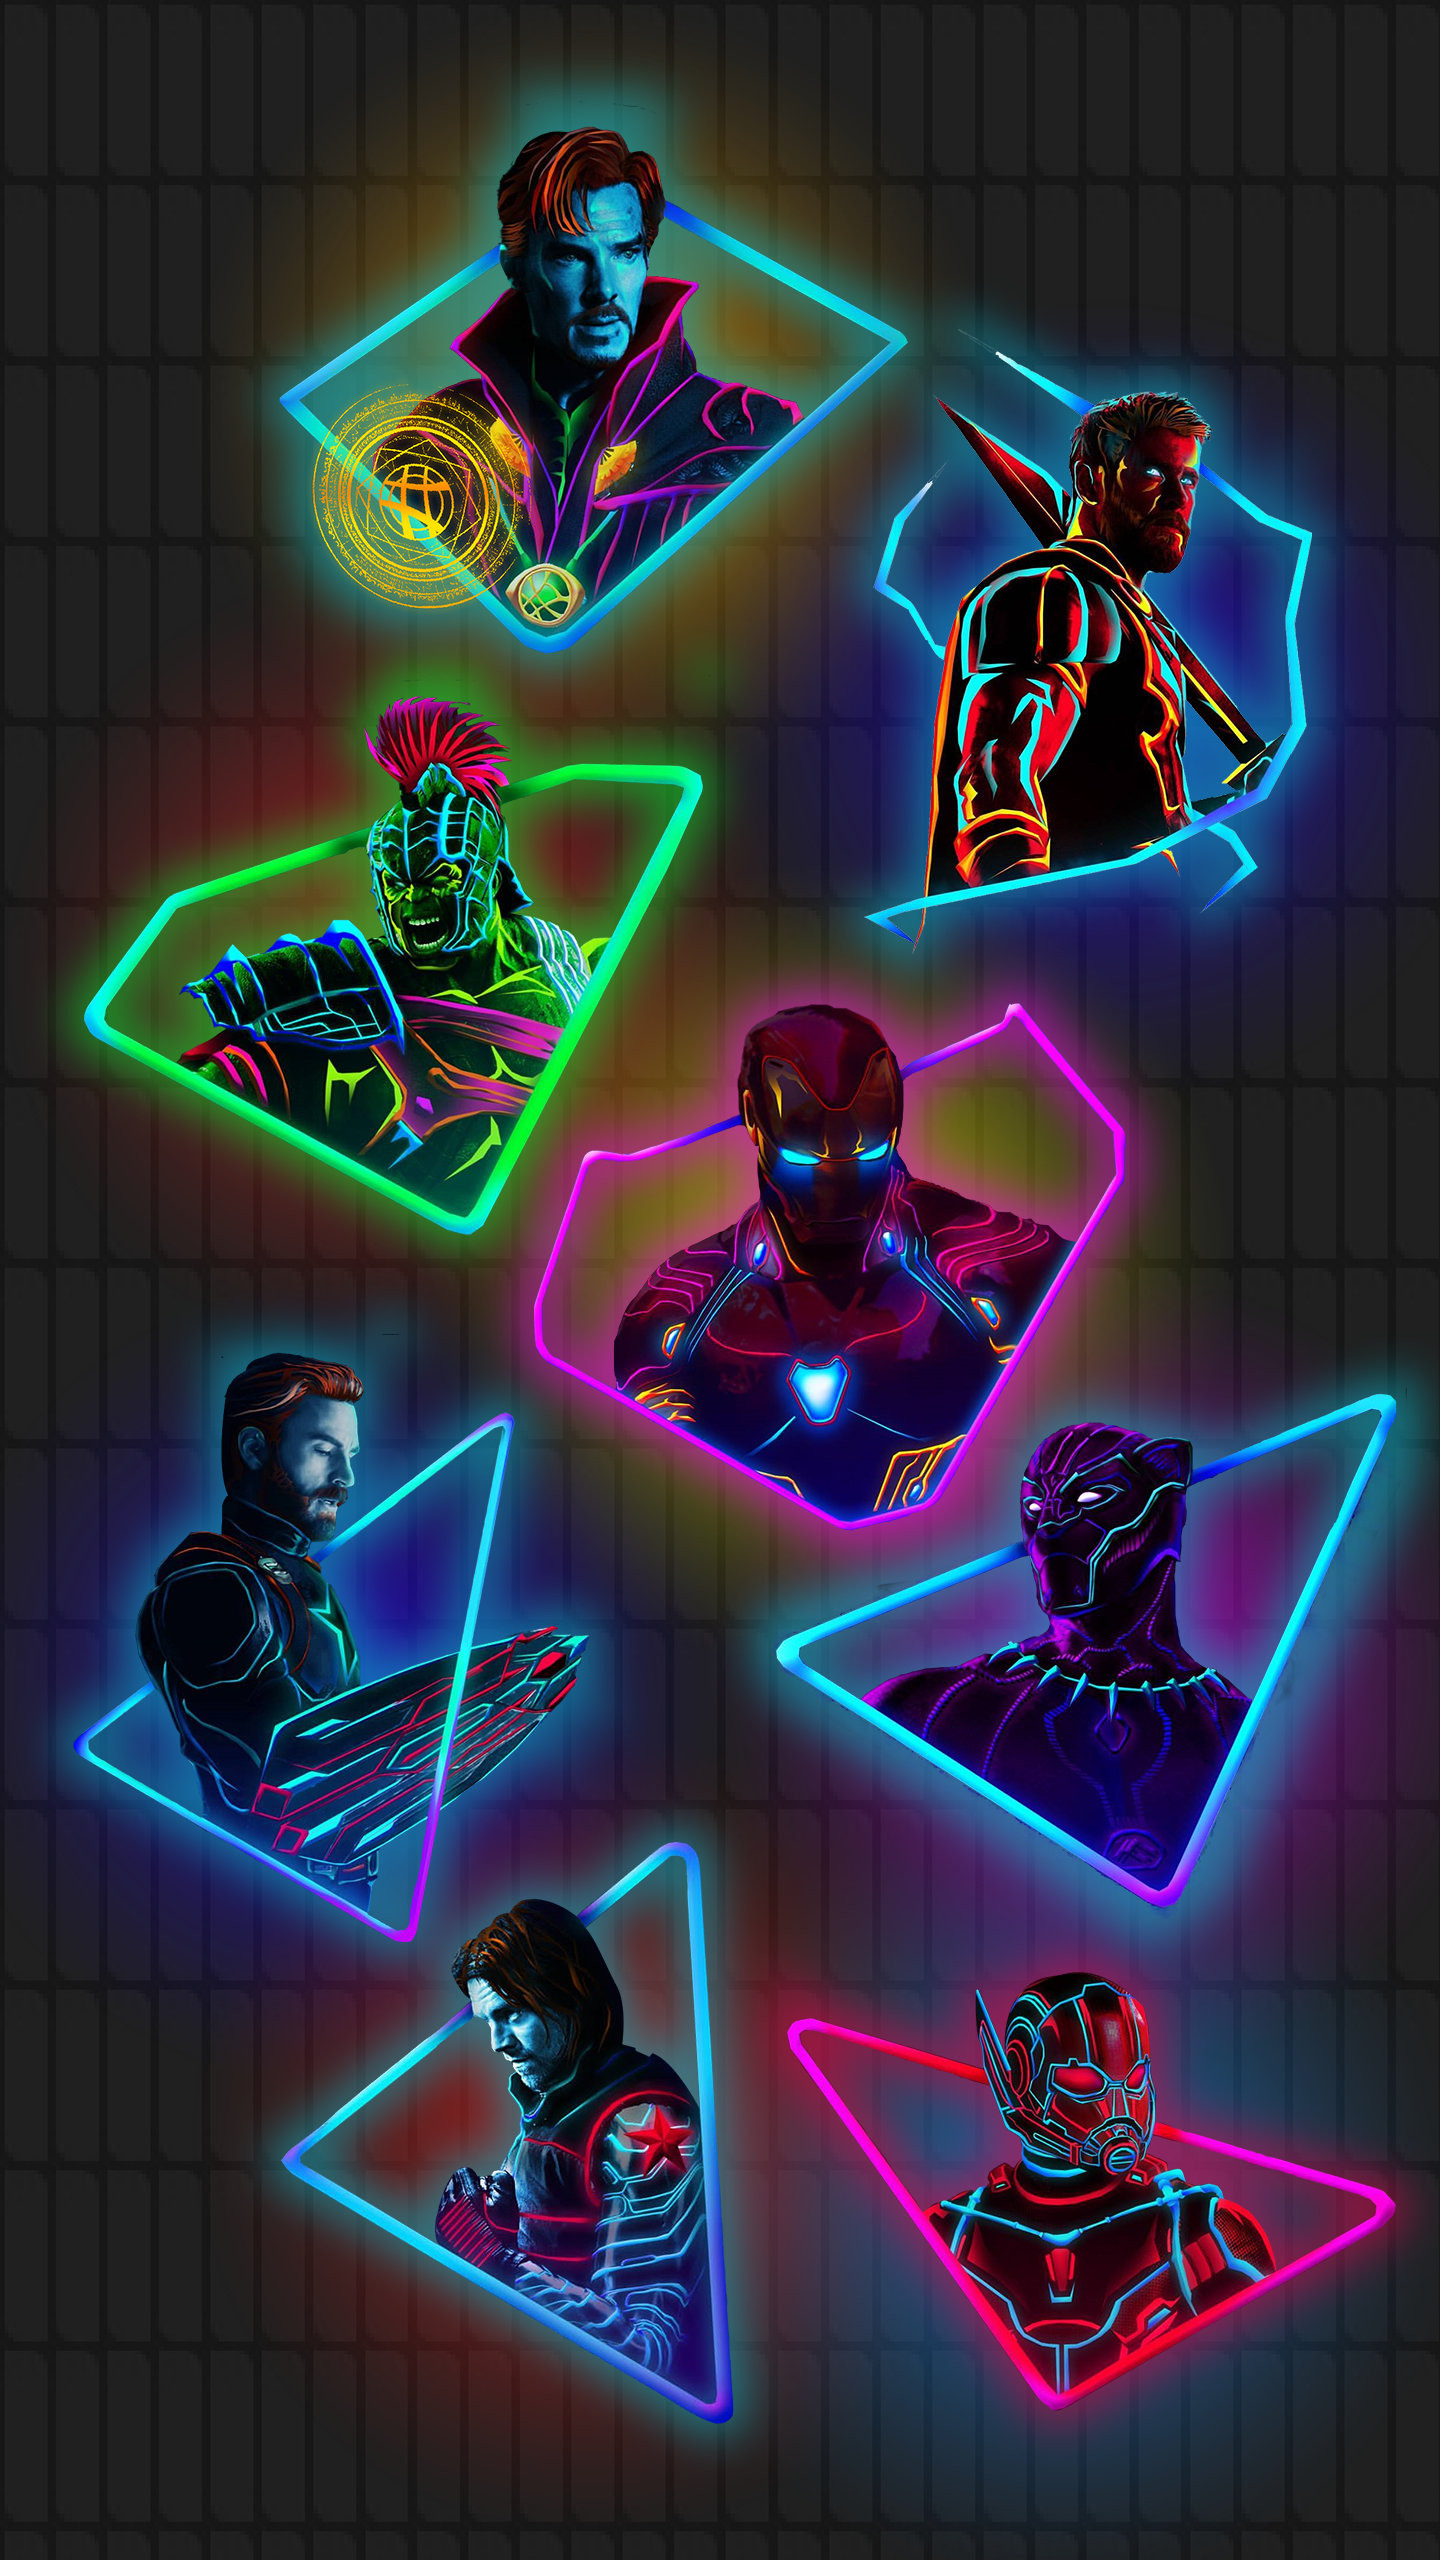 My Edit Of The Neon Marvel Characters Original Art By Aniket